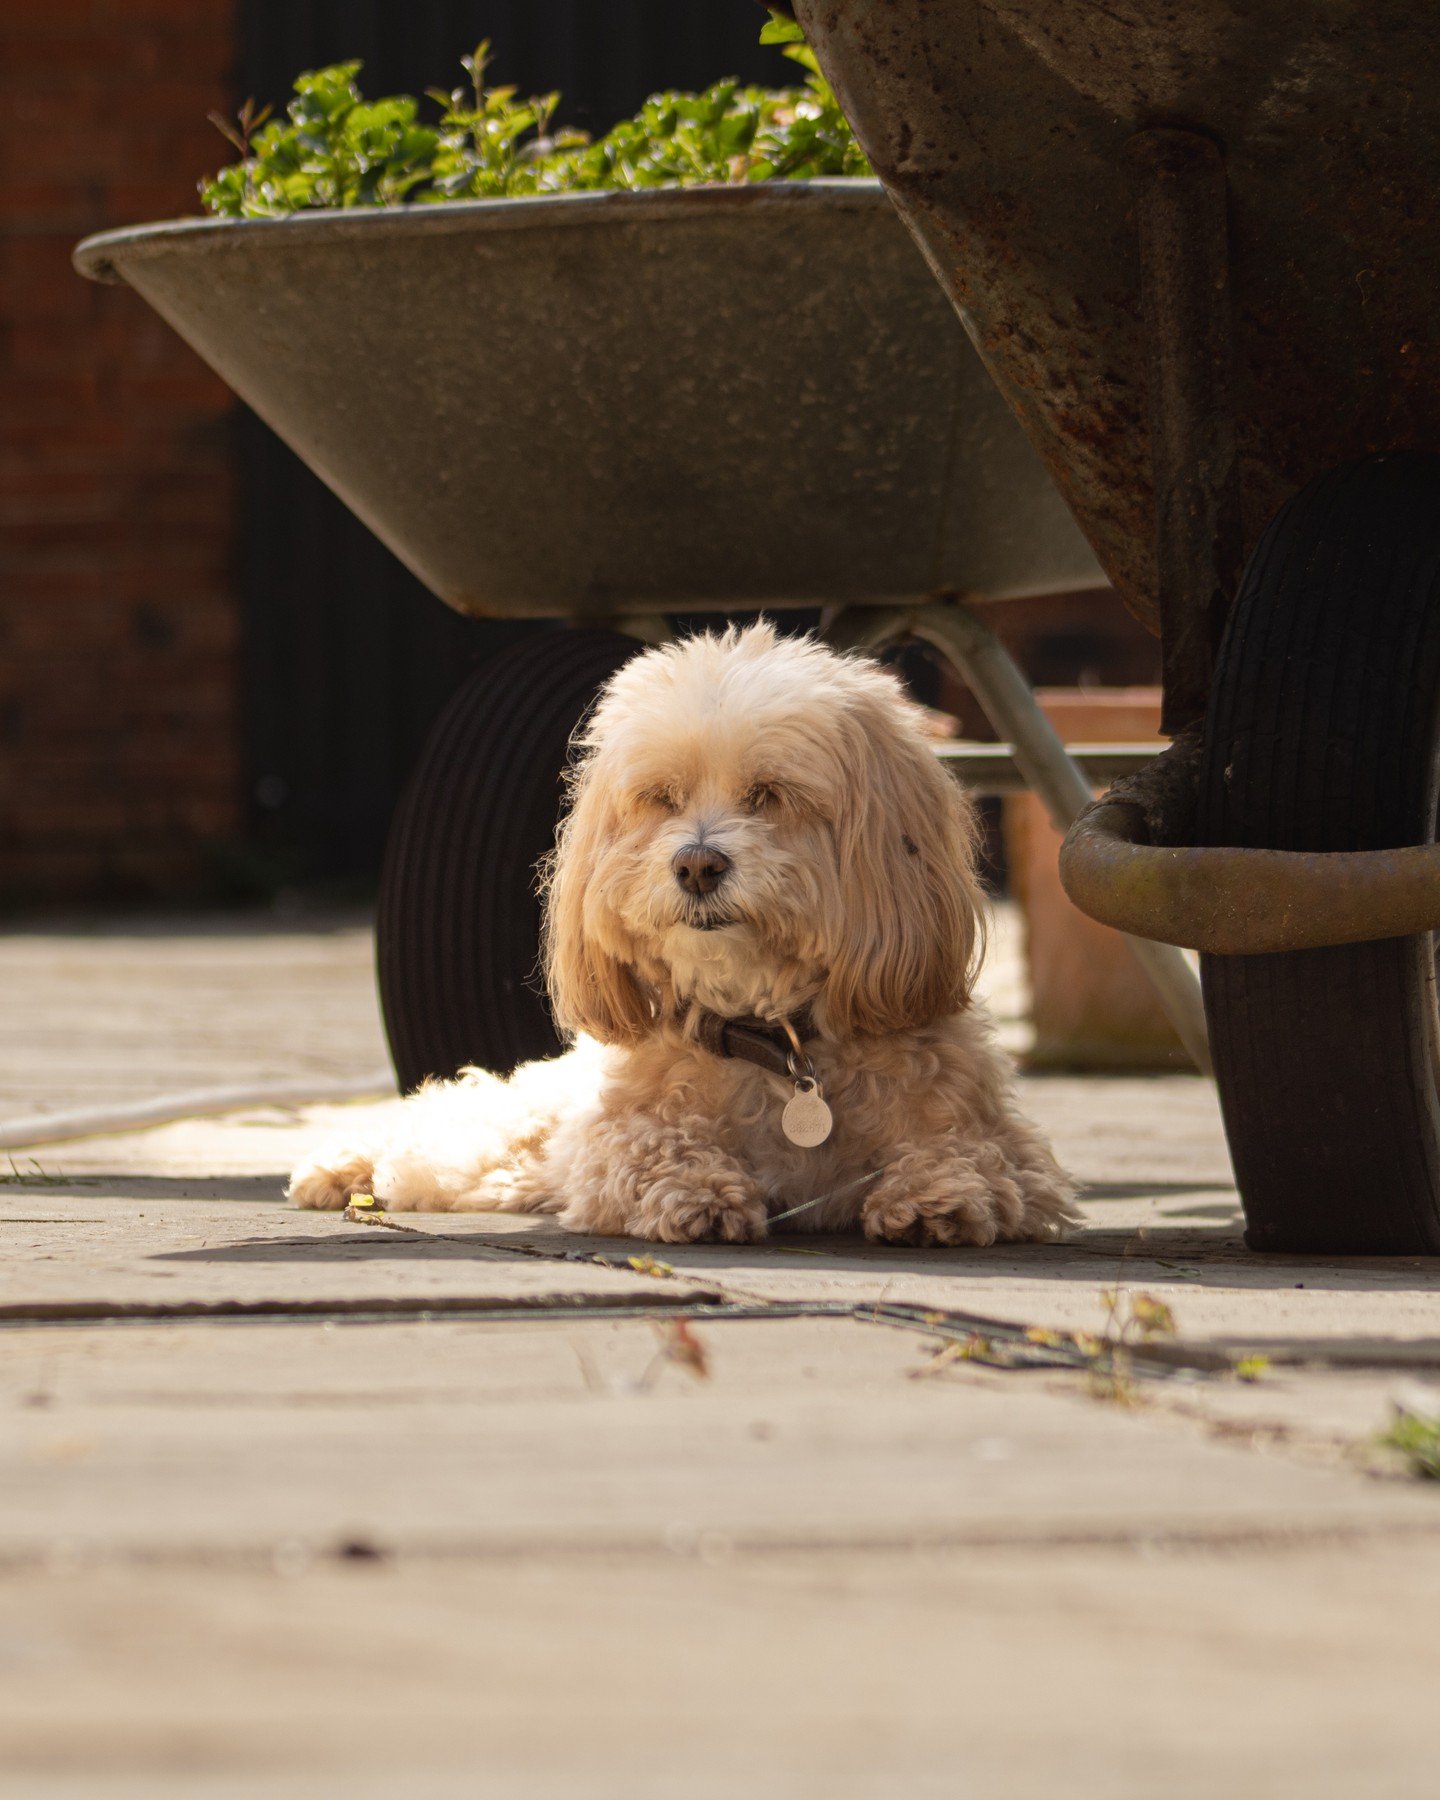 Buying a new lens always means my dog becomes a model 

#canon2000d #maltipoo #lincolnshirephotographer